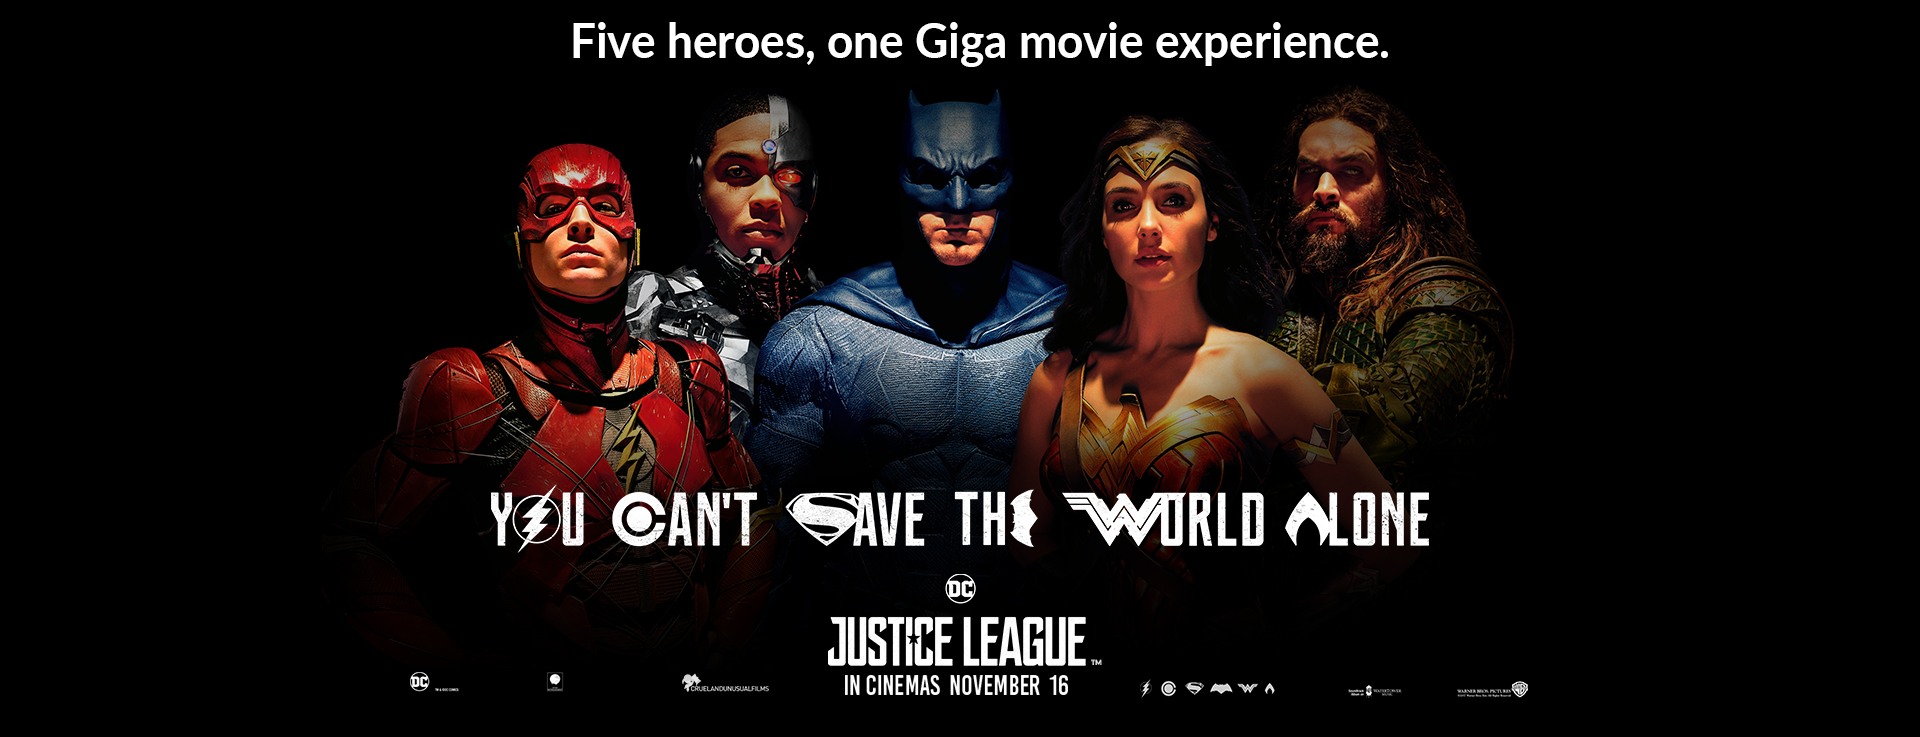 smart-gigamovies-justiceleague-img_02